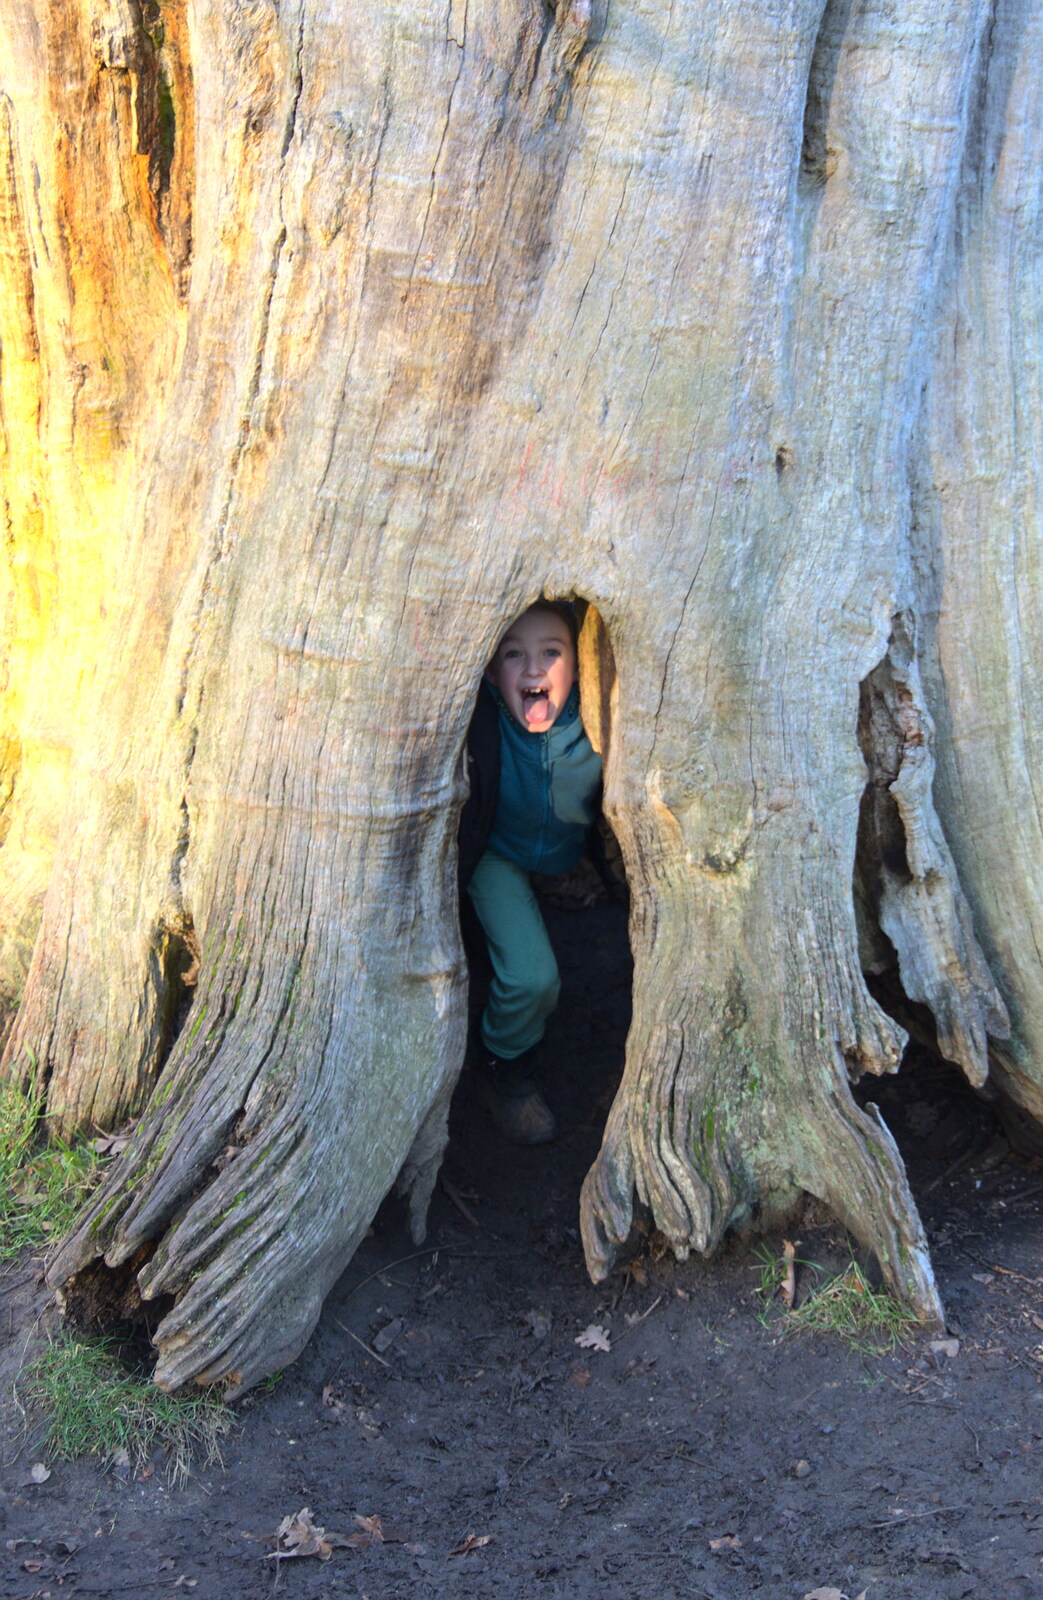 Fred hides in a tree stump from Life Below Stairs, Ickworth House, Horringer, Suffolk - 28th January 2018